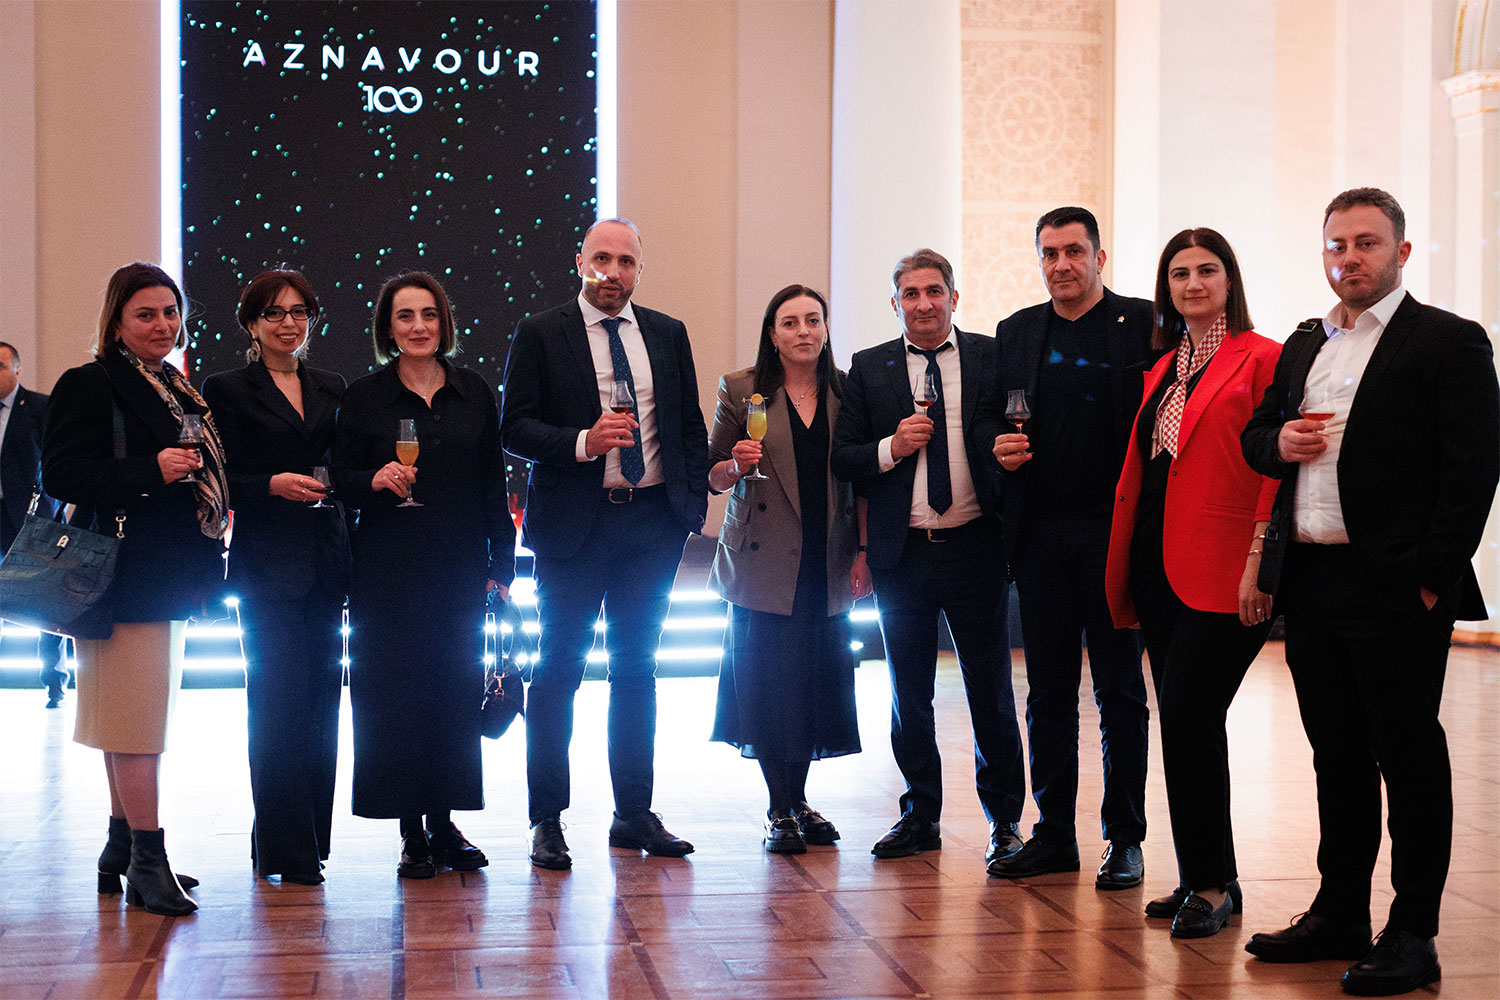 ARARAT is the General Partner of Charles Aznavour 100th Anniversary Celebration Events